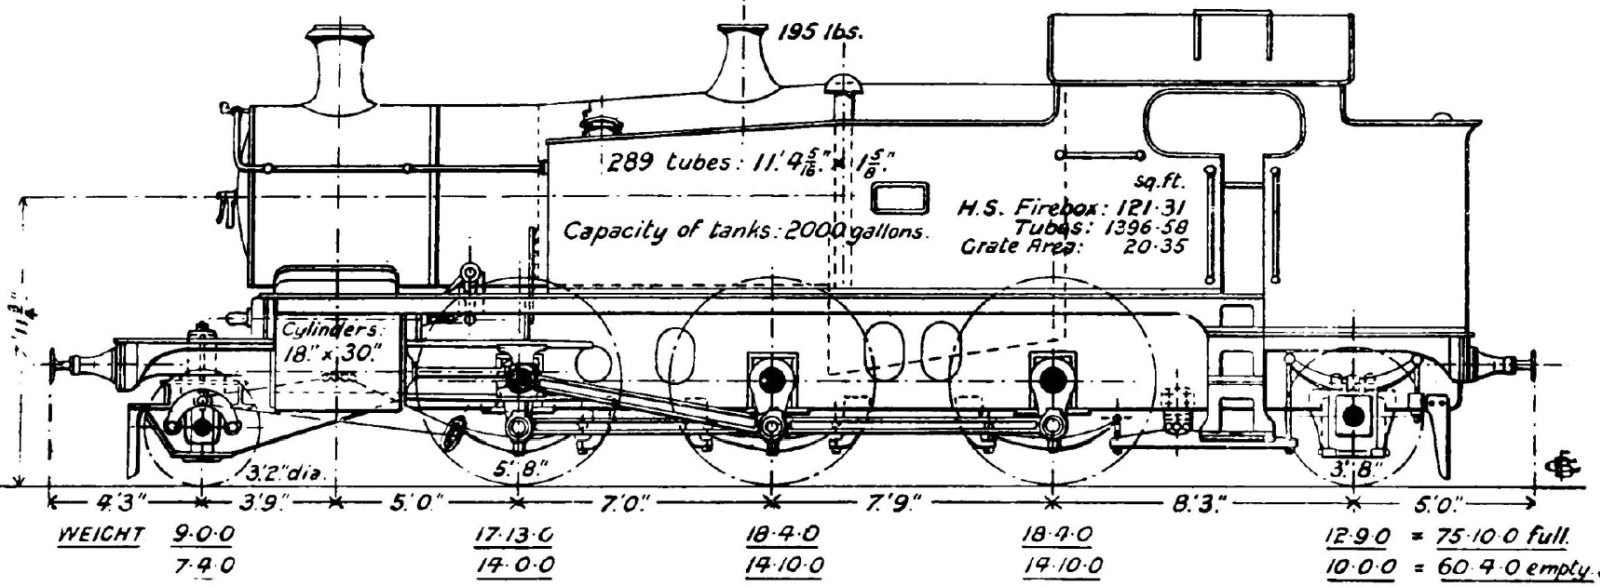 Schematic drawing